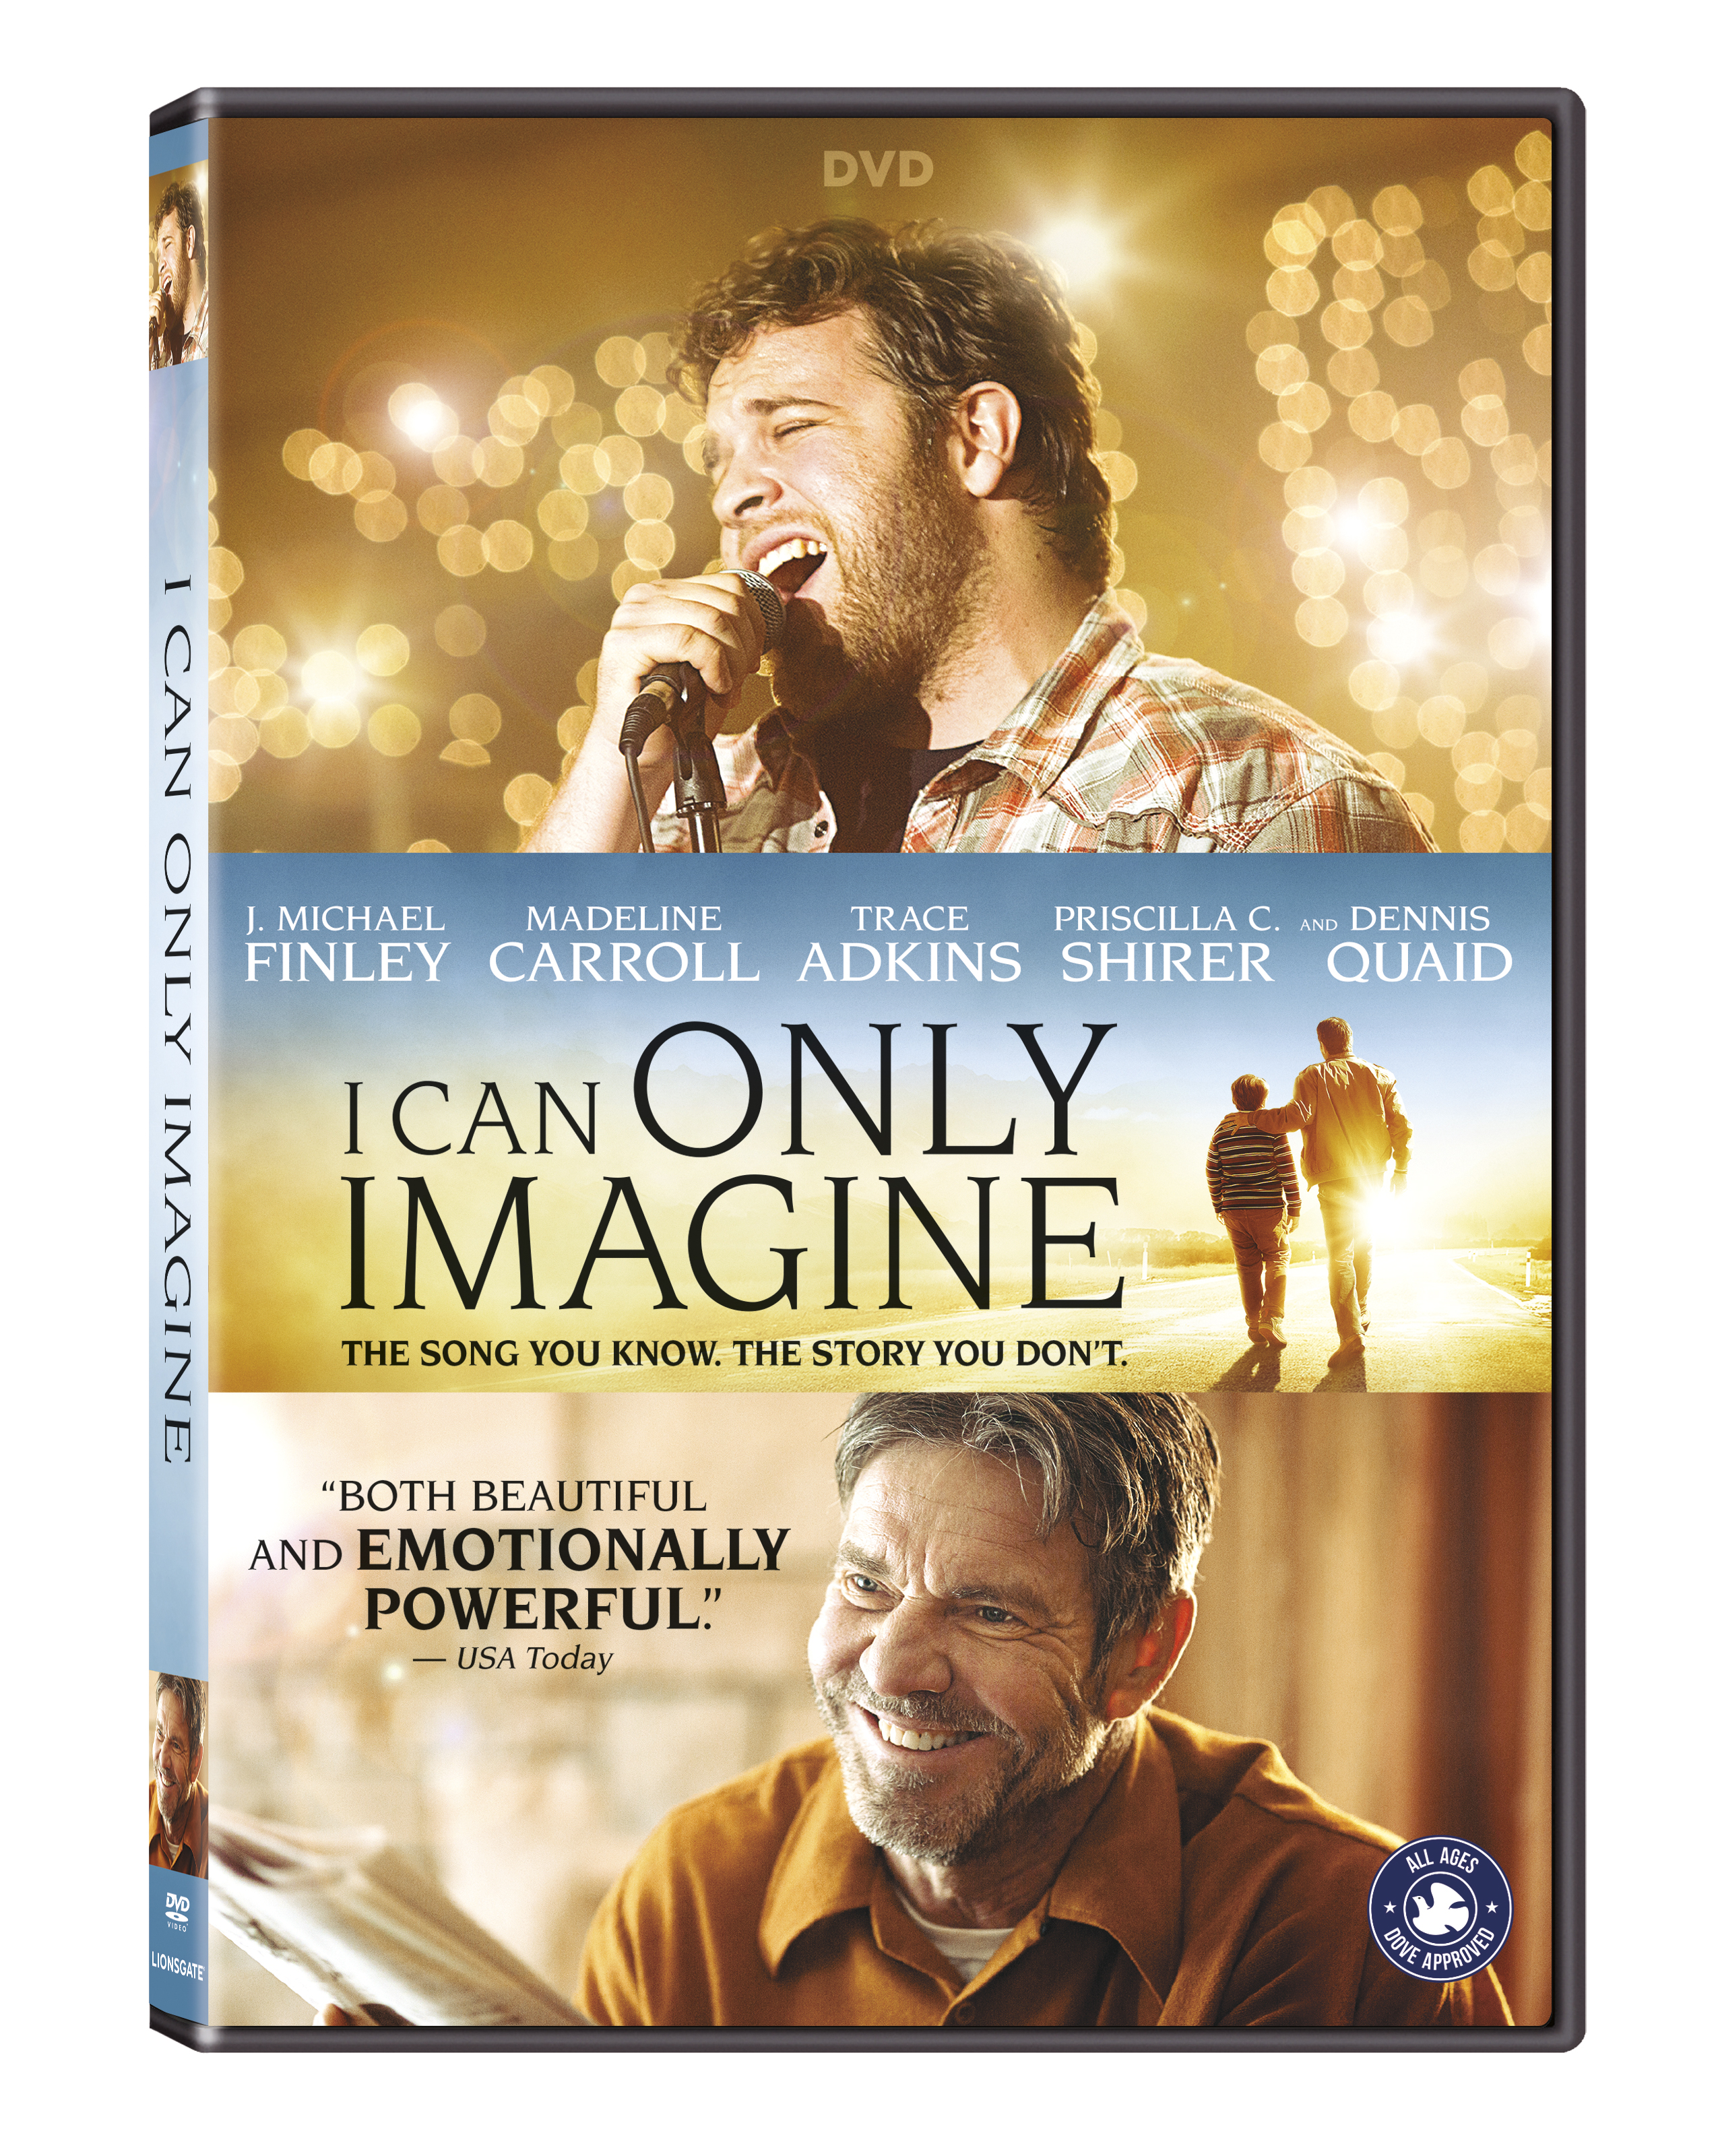 I Can Only Imagine DVD cover (Lionsgate Home Entertainment)